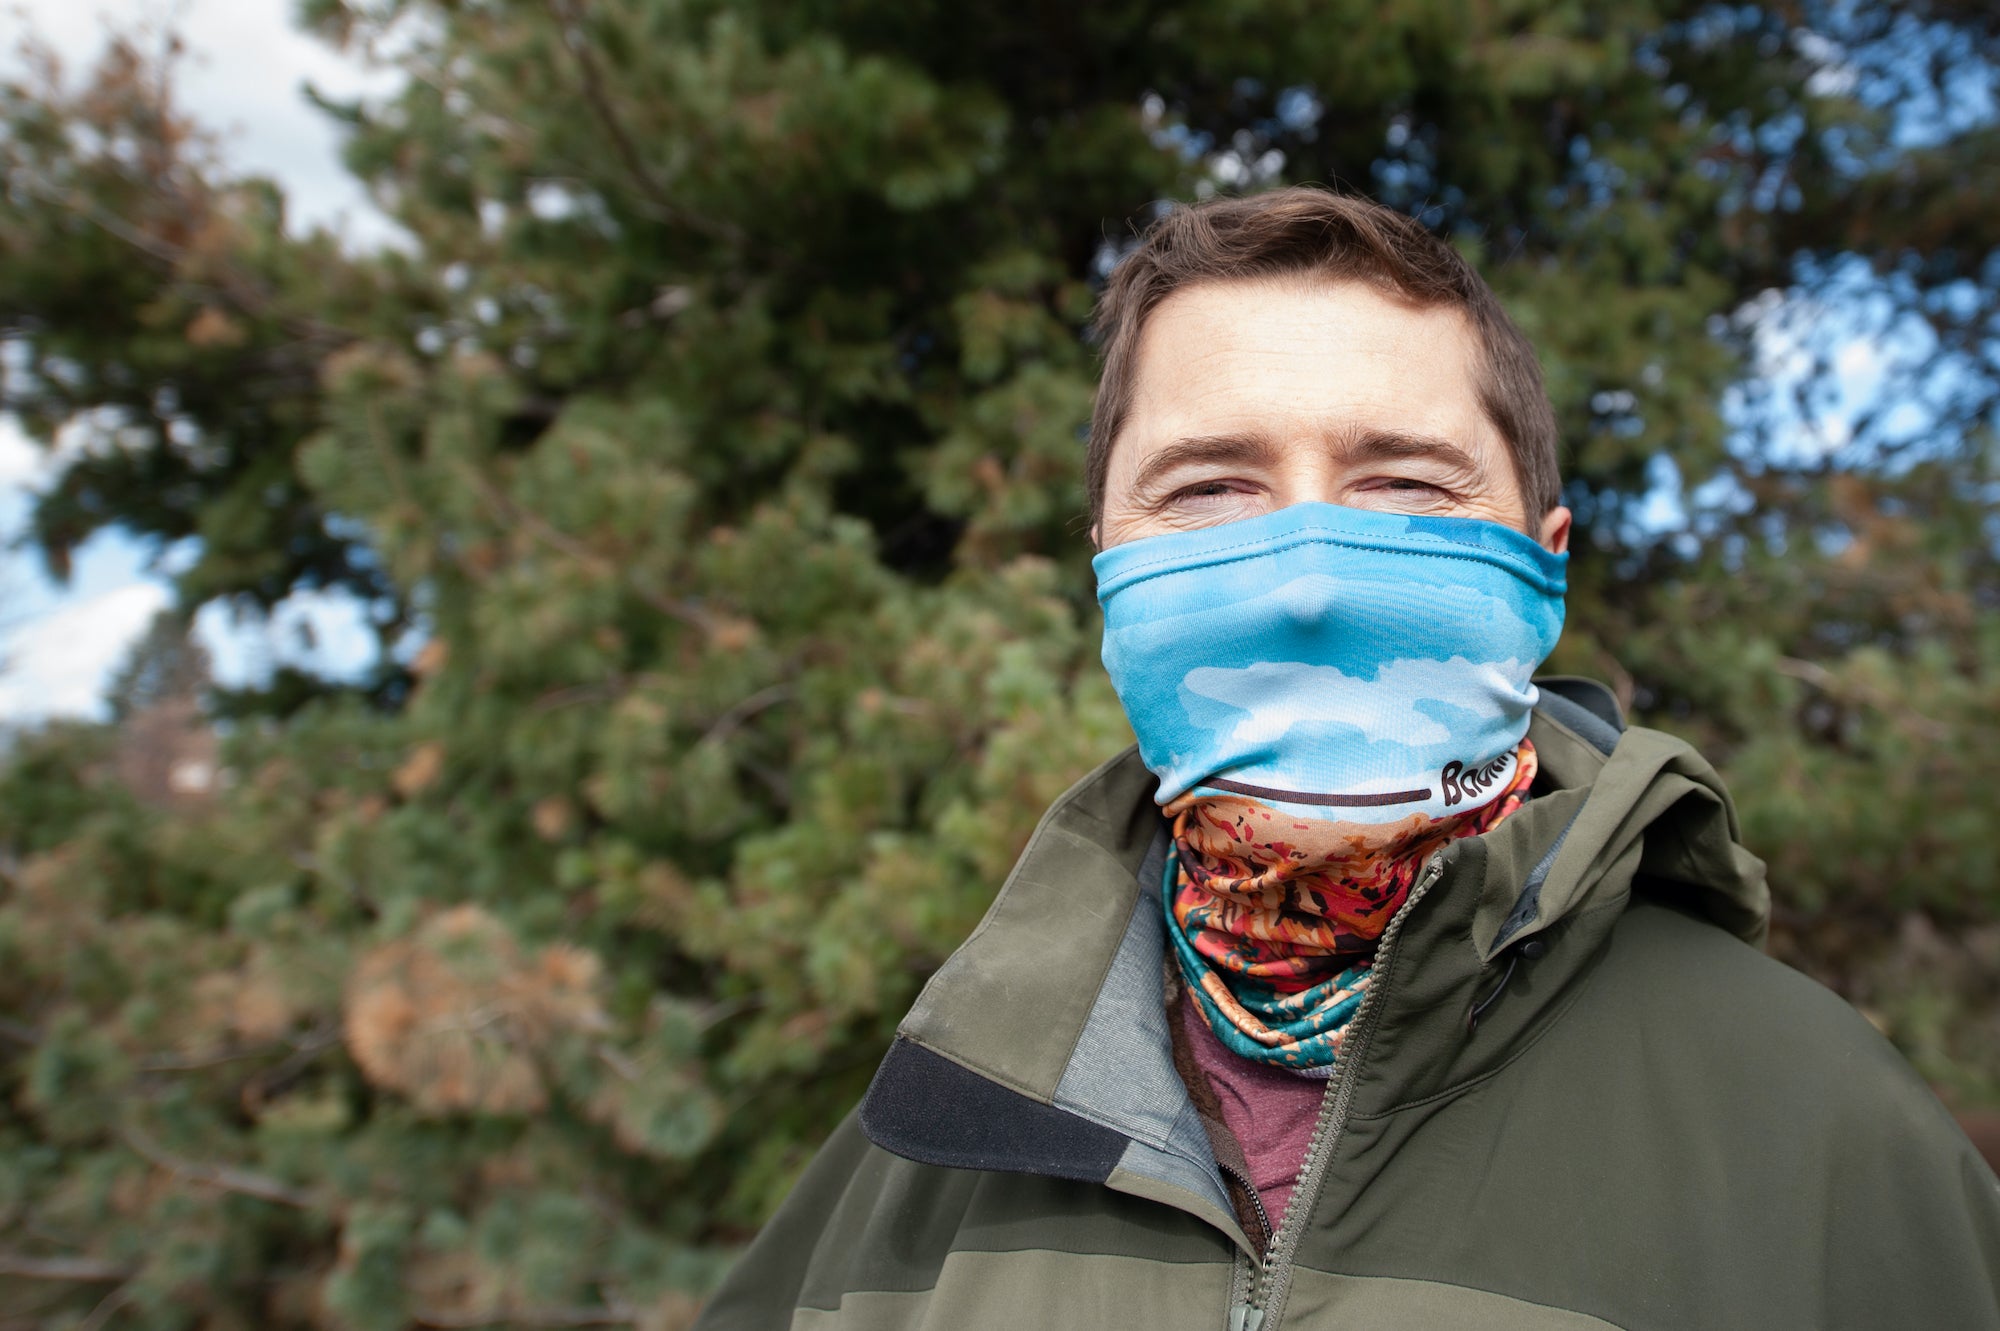 Badlands National Park Abstract Neck Gaiter -  -  - Knotty Tie Co.